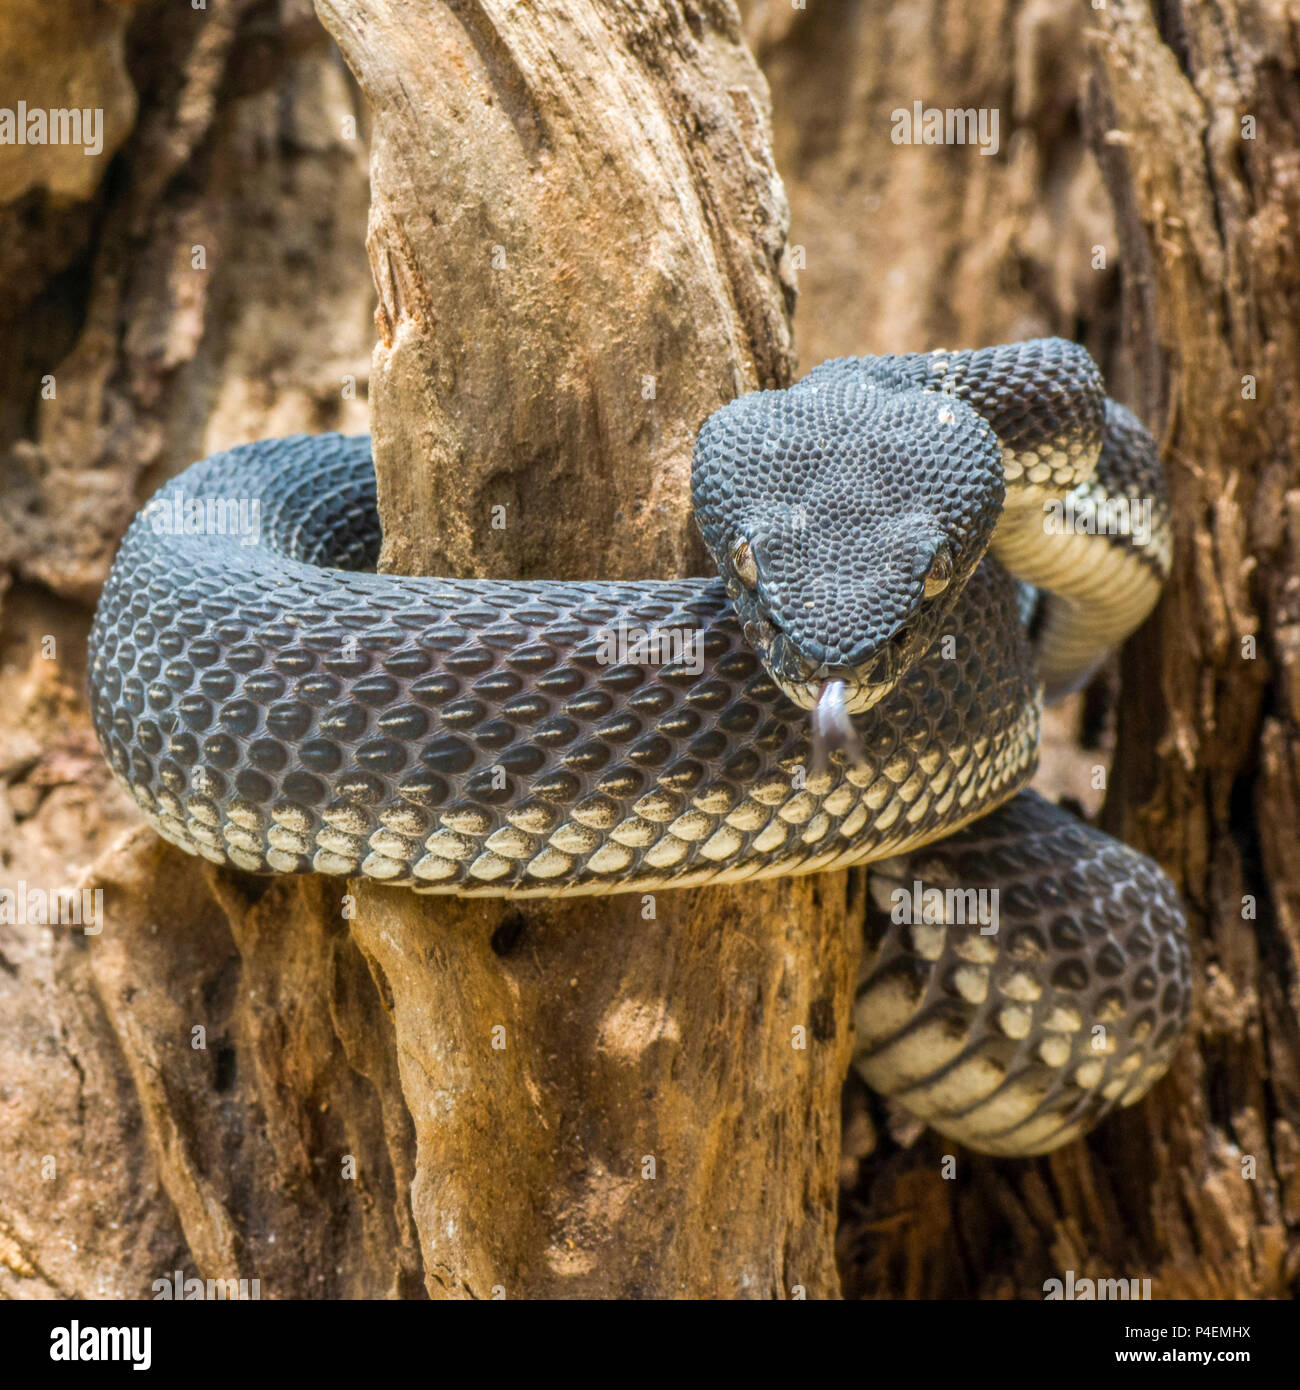 Black snake coiled around a tree, Indonesia Stock Photo